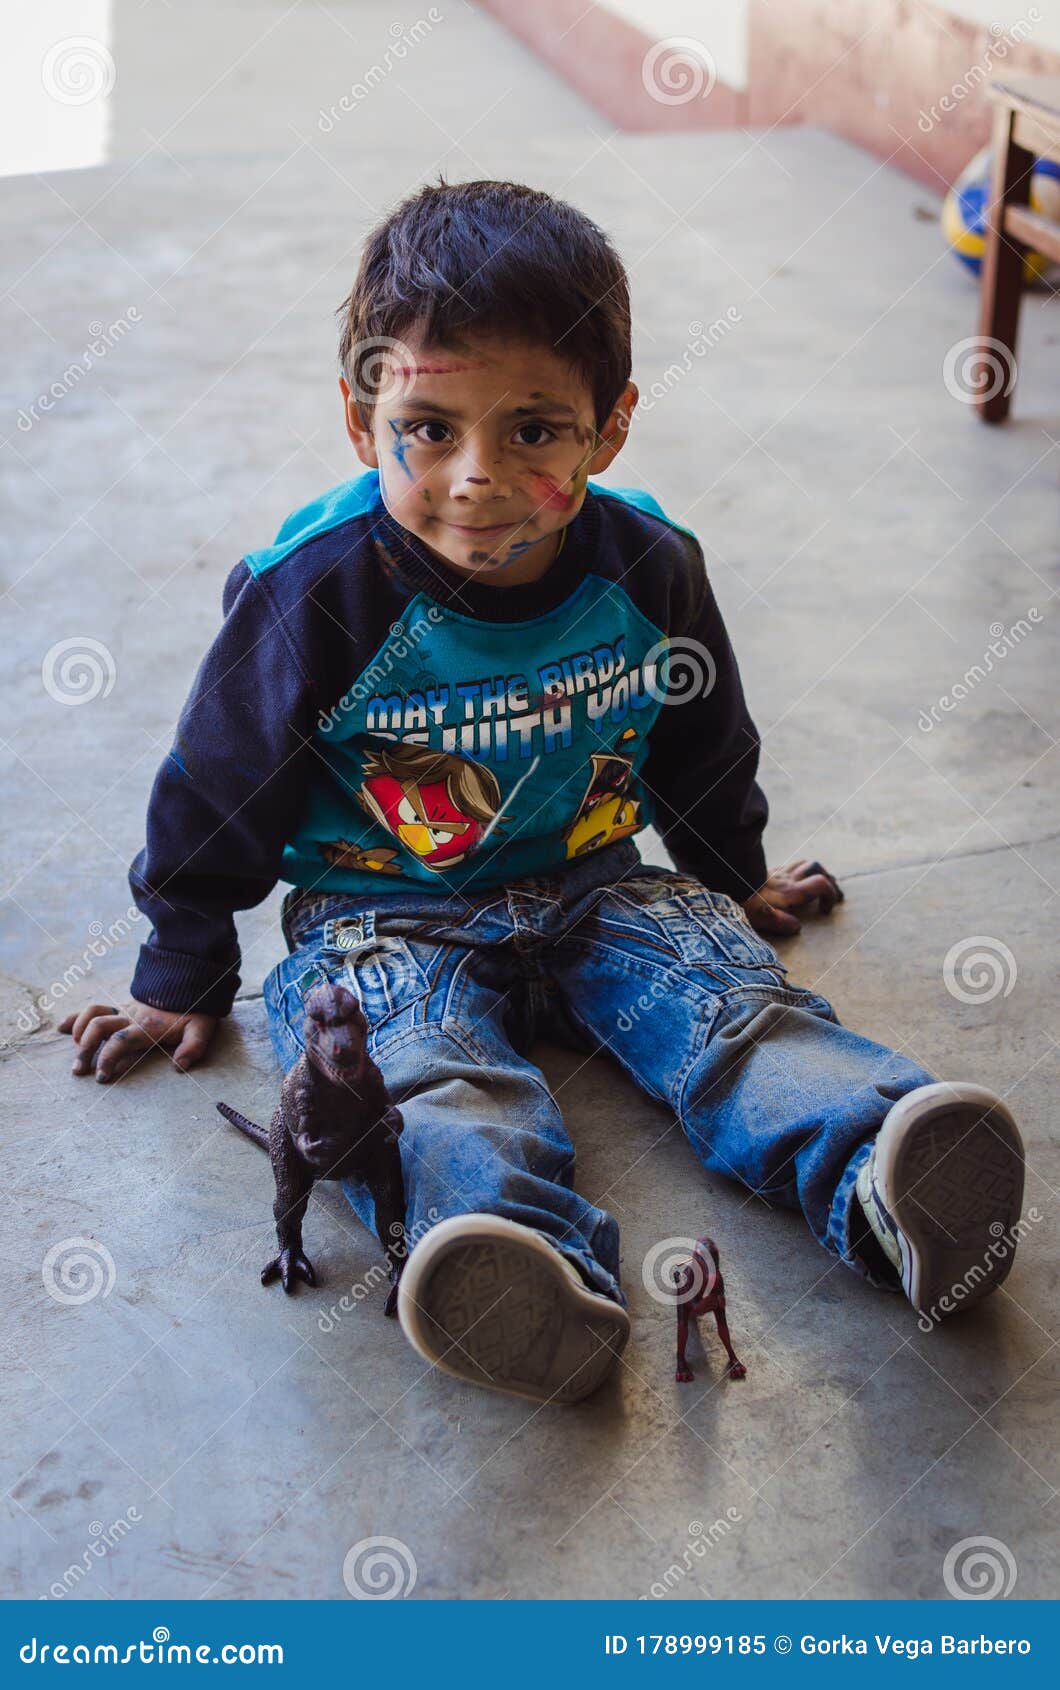 Yungay Peru August 4 2014 Smiling Latino Boy With Indigenous Features With A Dirty Face Of Paint Playing With T Rex Dinosaur Editorial Image Image Of Child Peruvian 178999185